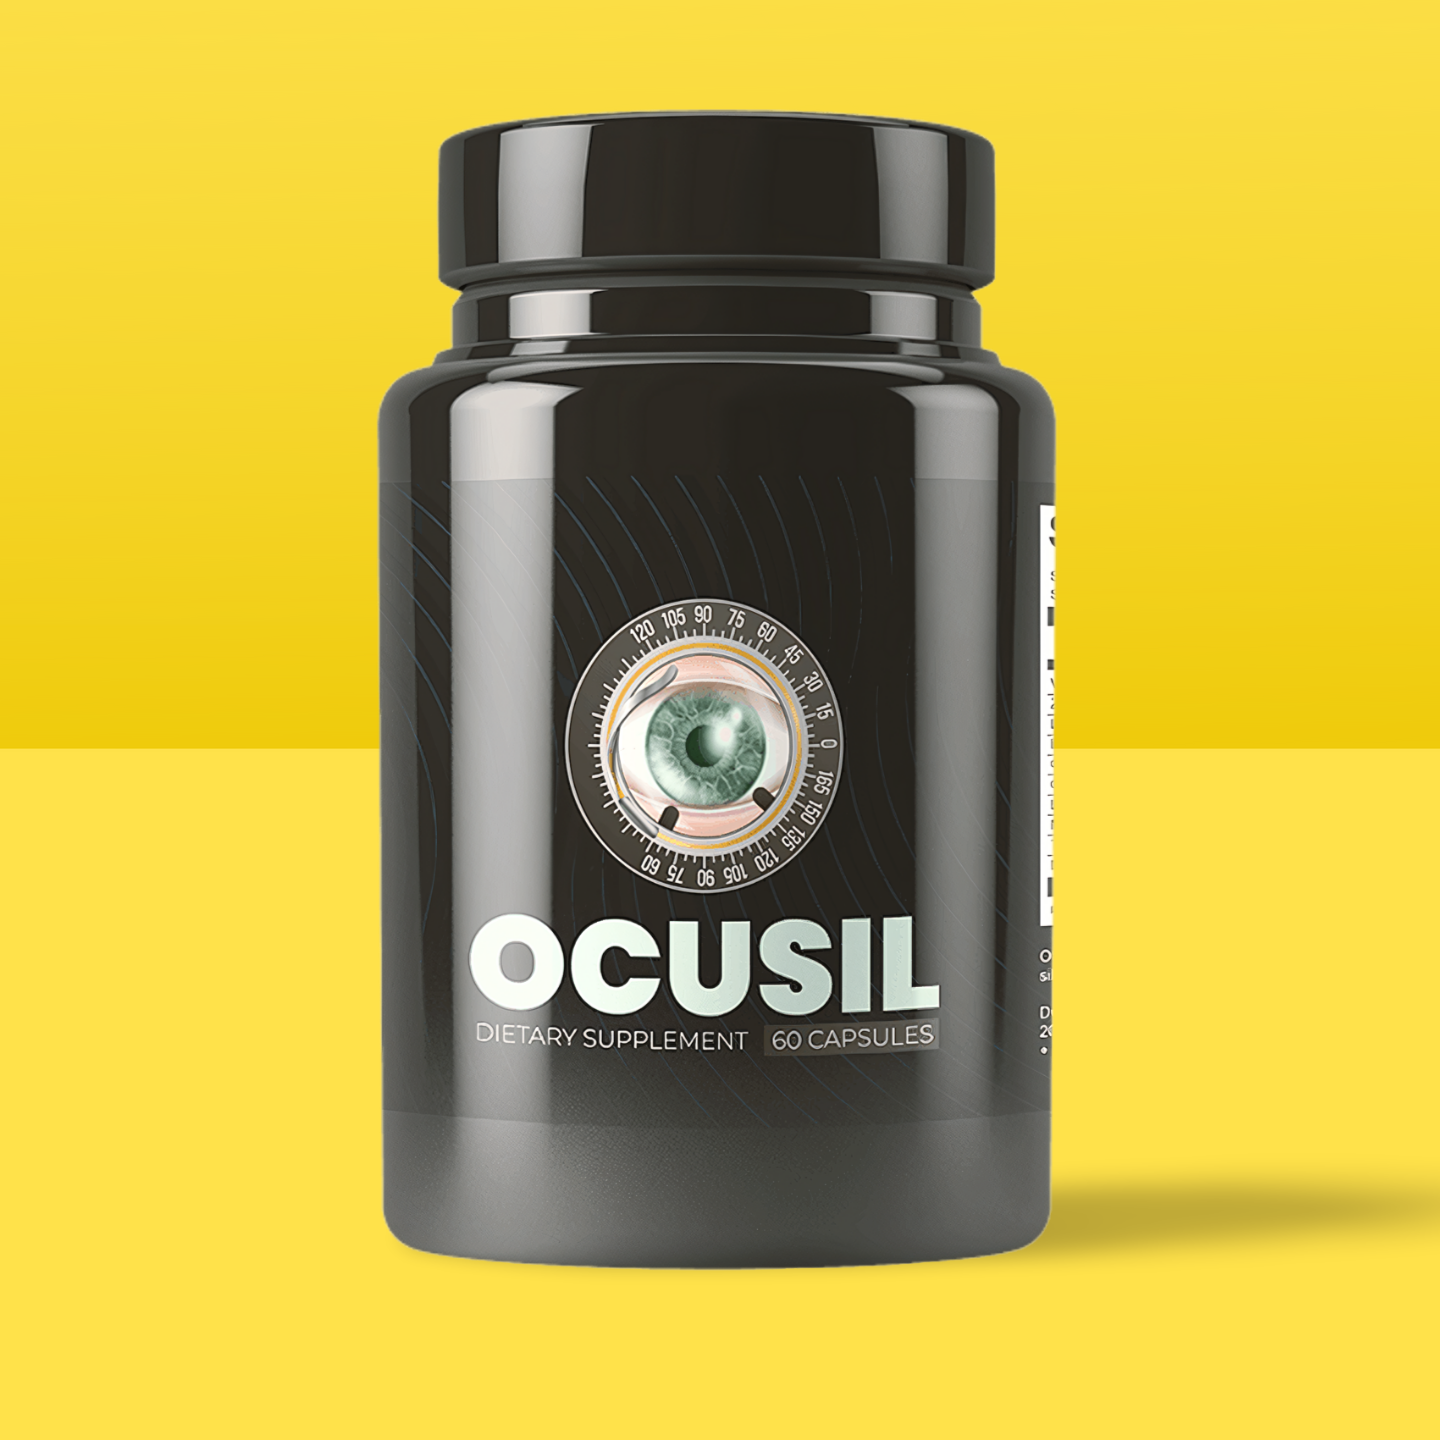 Ocusil Reviews – A Trustworthy Vision Aid? Revealing the Facts About This Eye Health Supplement